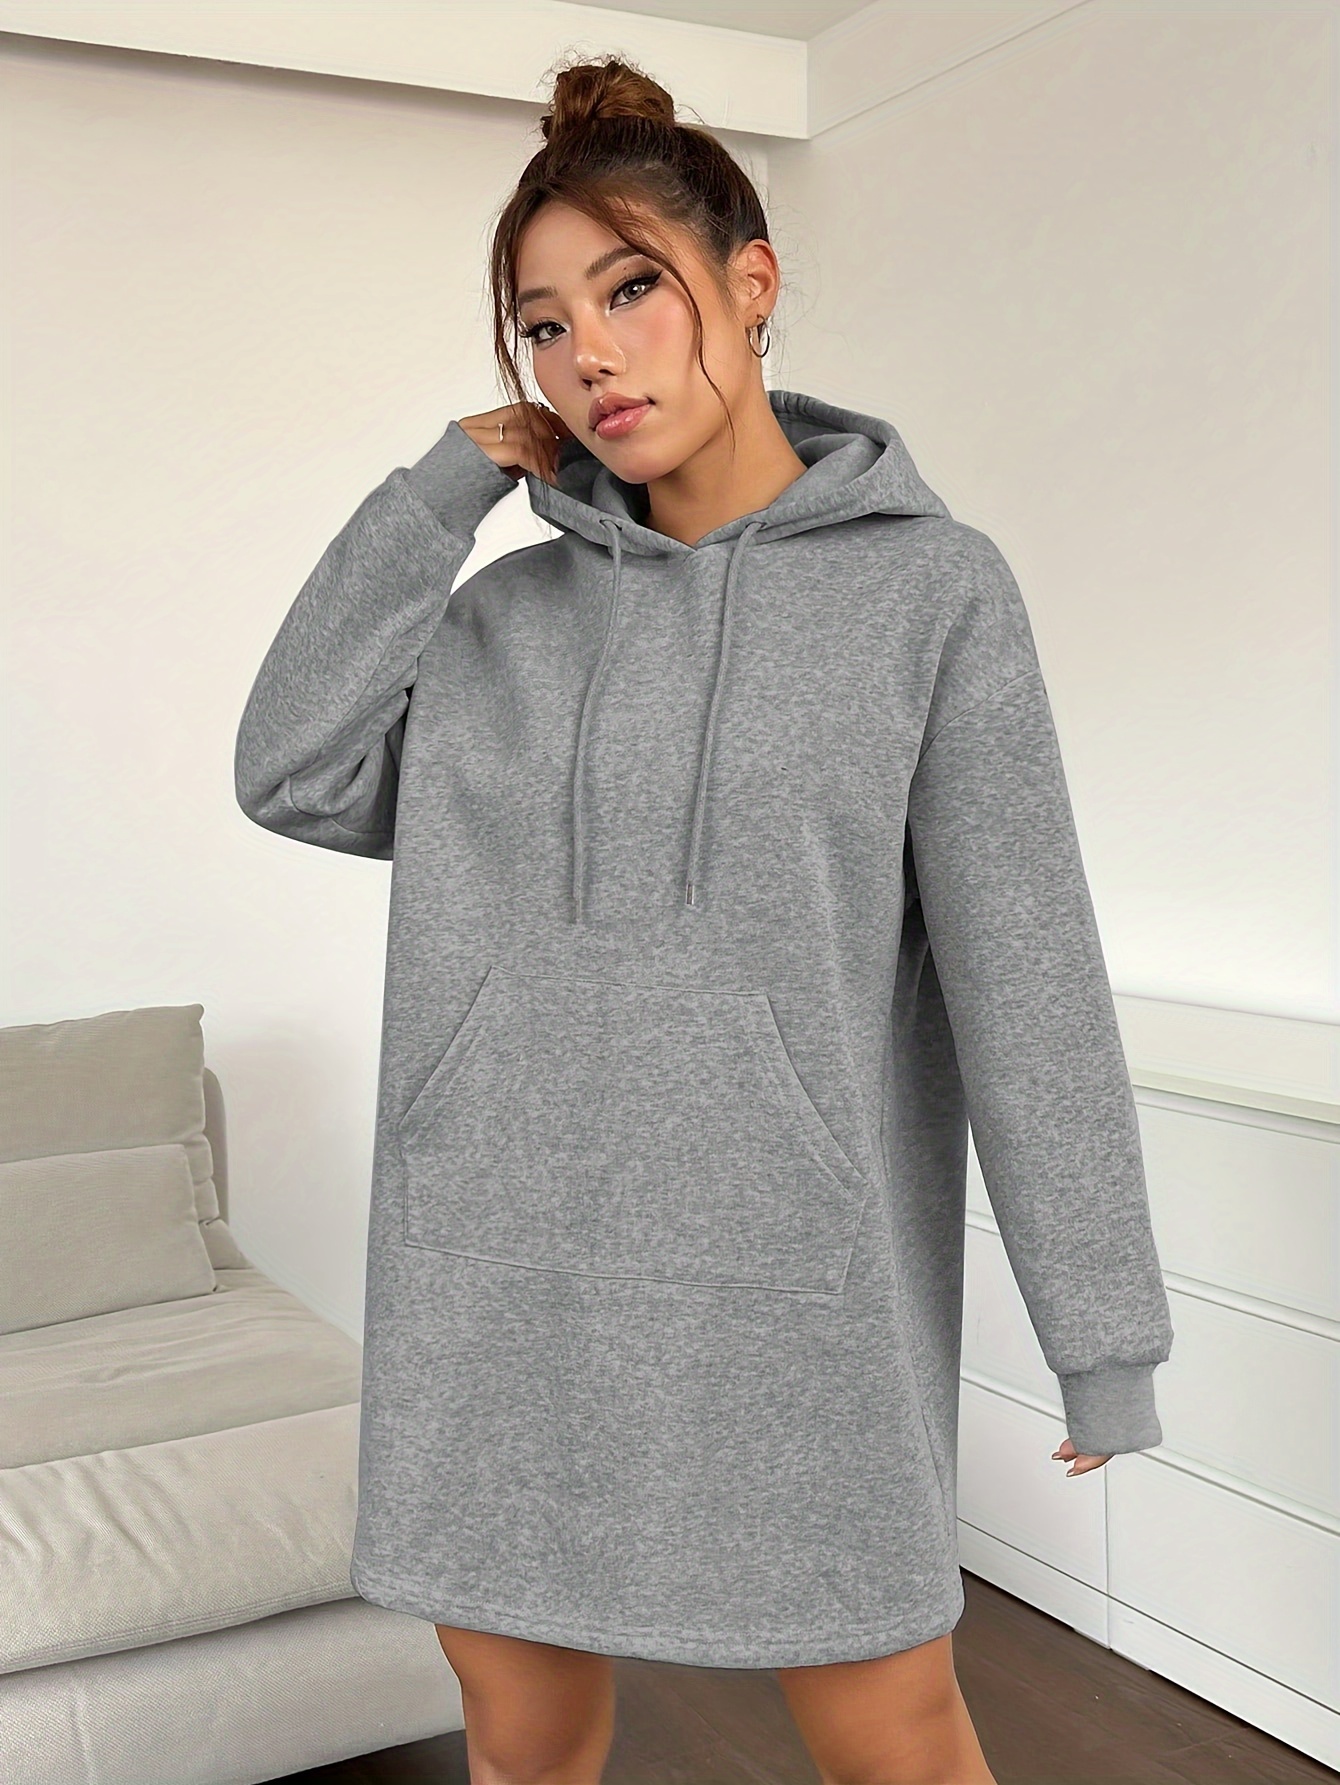 Women Loose Hooded Dress with Pockets Casual Long Sleeve